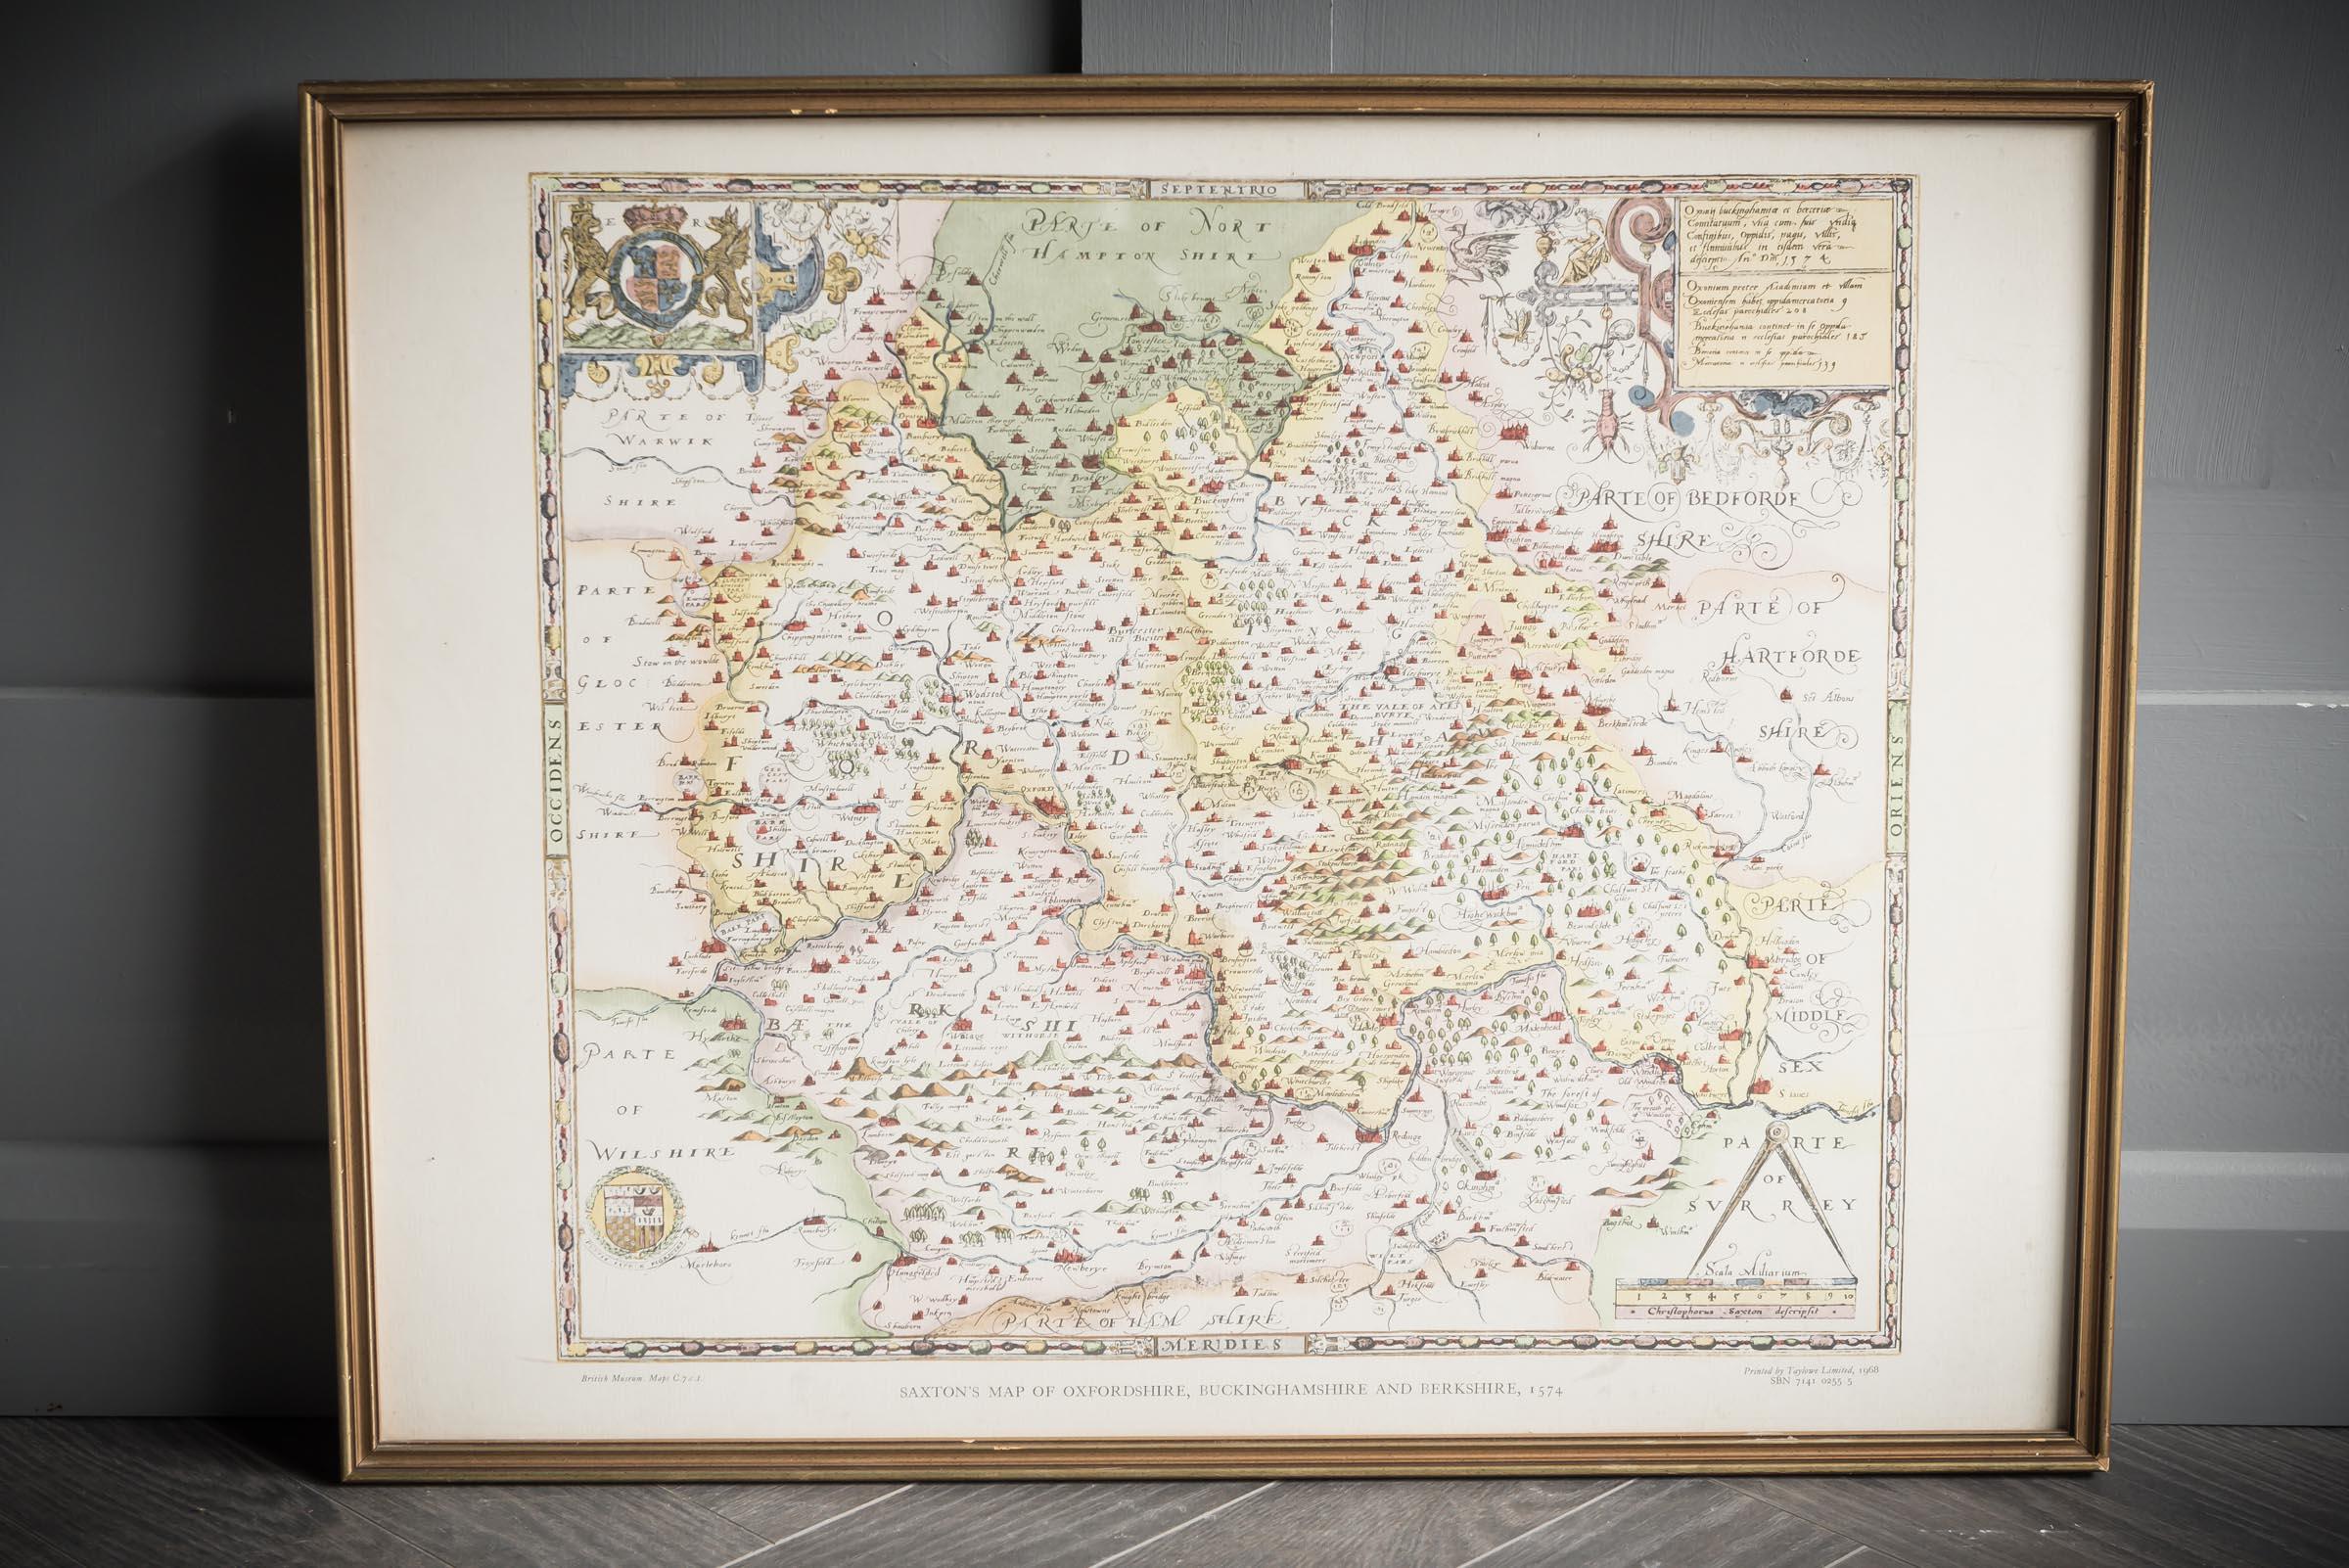 Framed Saxton’s Map of Oxfordshire, Buckinghamshire, and Berkshire, 1574. Originally published as one of thirty-three maps in Christopher Saxton’s (c.1542- c.1610) Atlas of the Counties of England and Wales, this map depicts the southeastern English